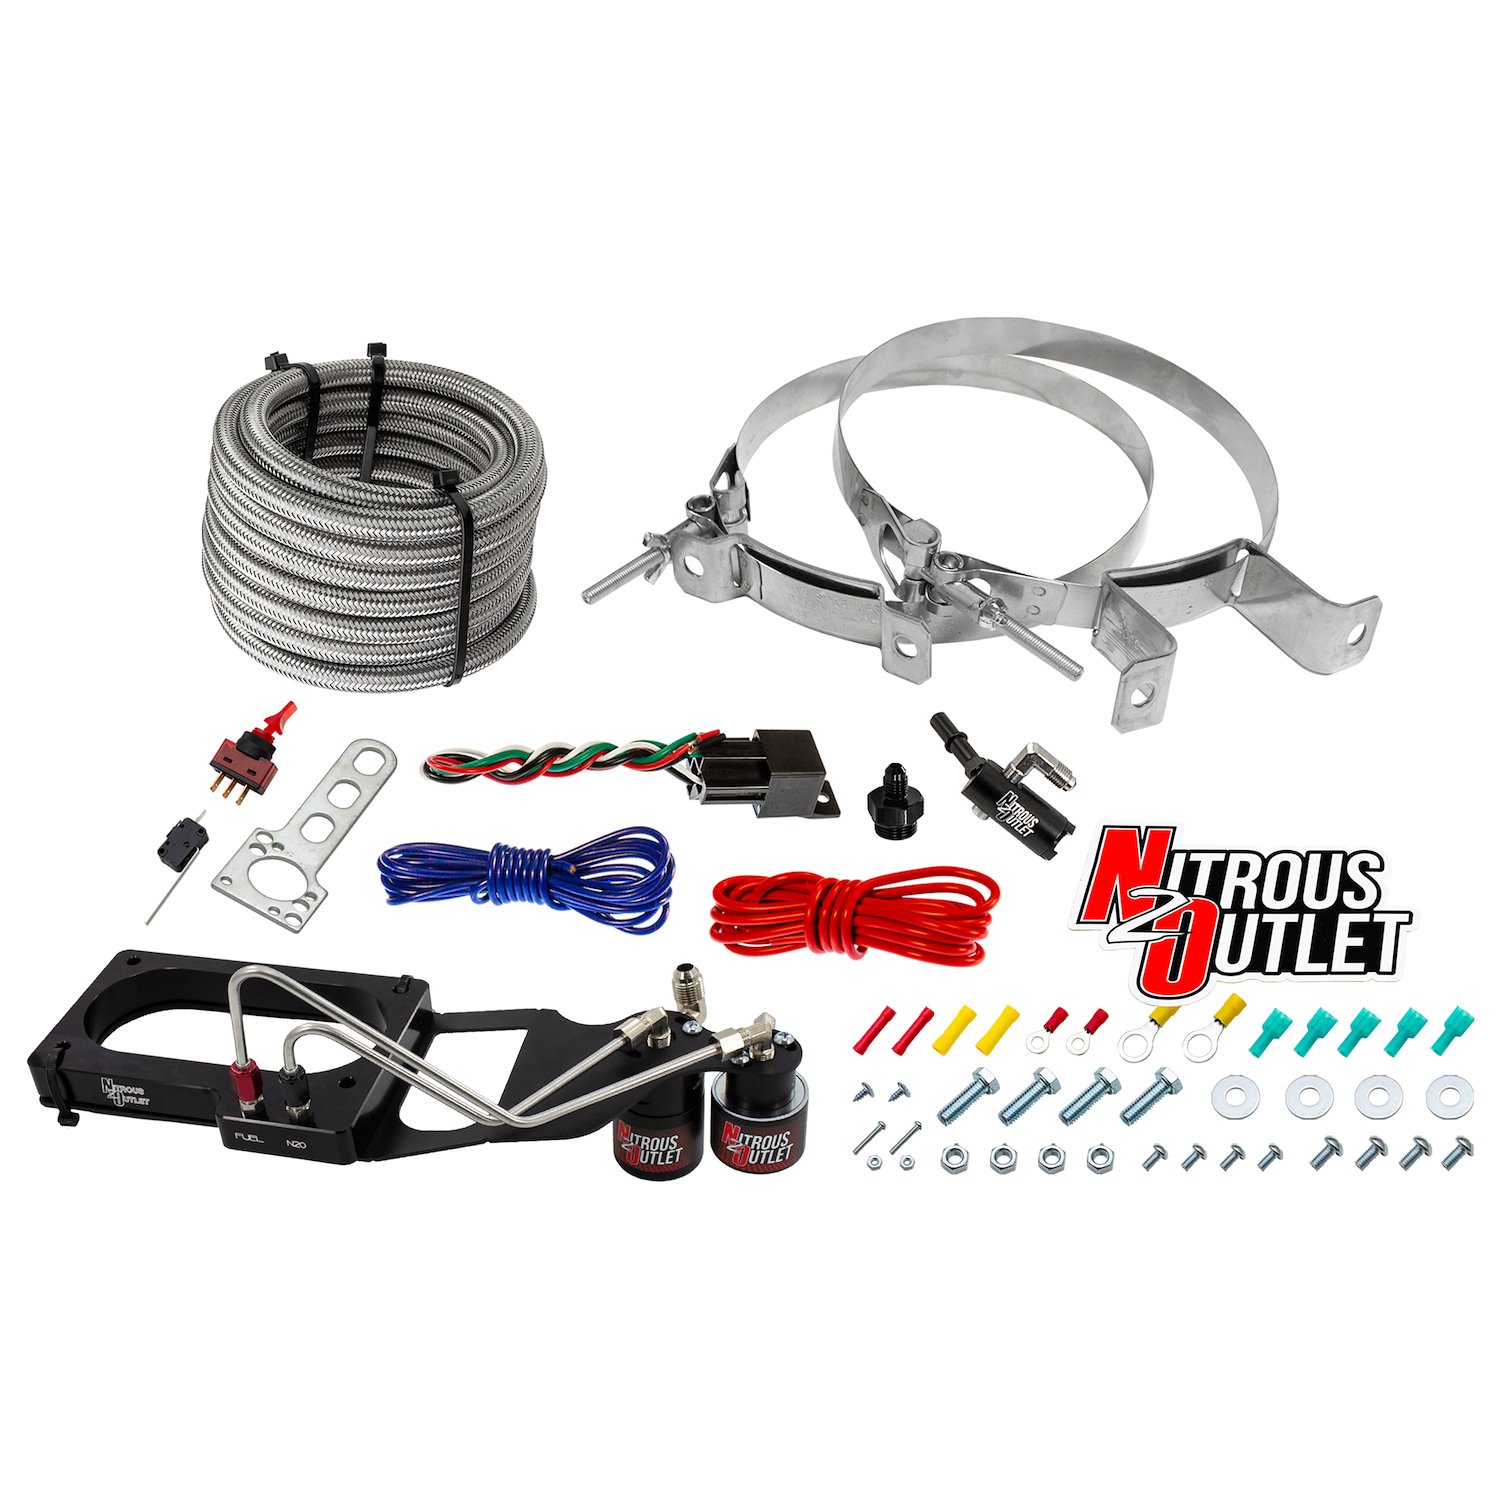 00-10153-00 Ford 2007-2014 GT 500 Mustang Hard-Line Plate System, Gas/E85, 5-55psi, 50-200HP, No Bottle